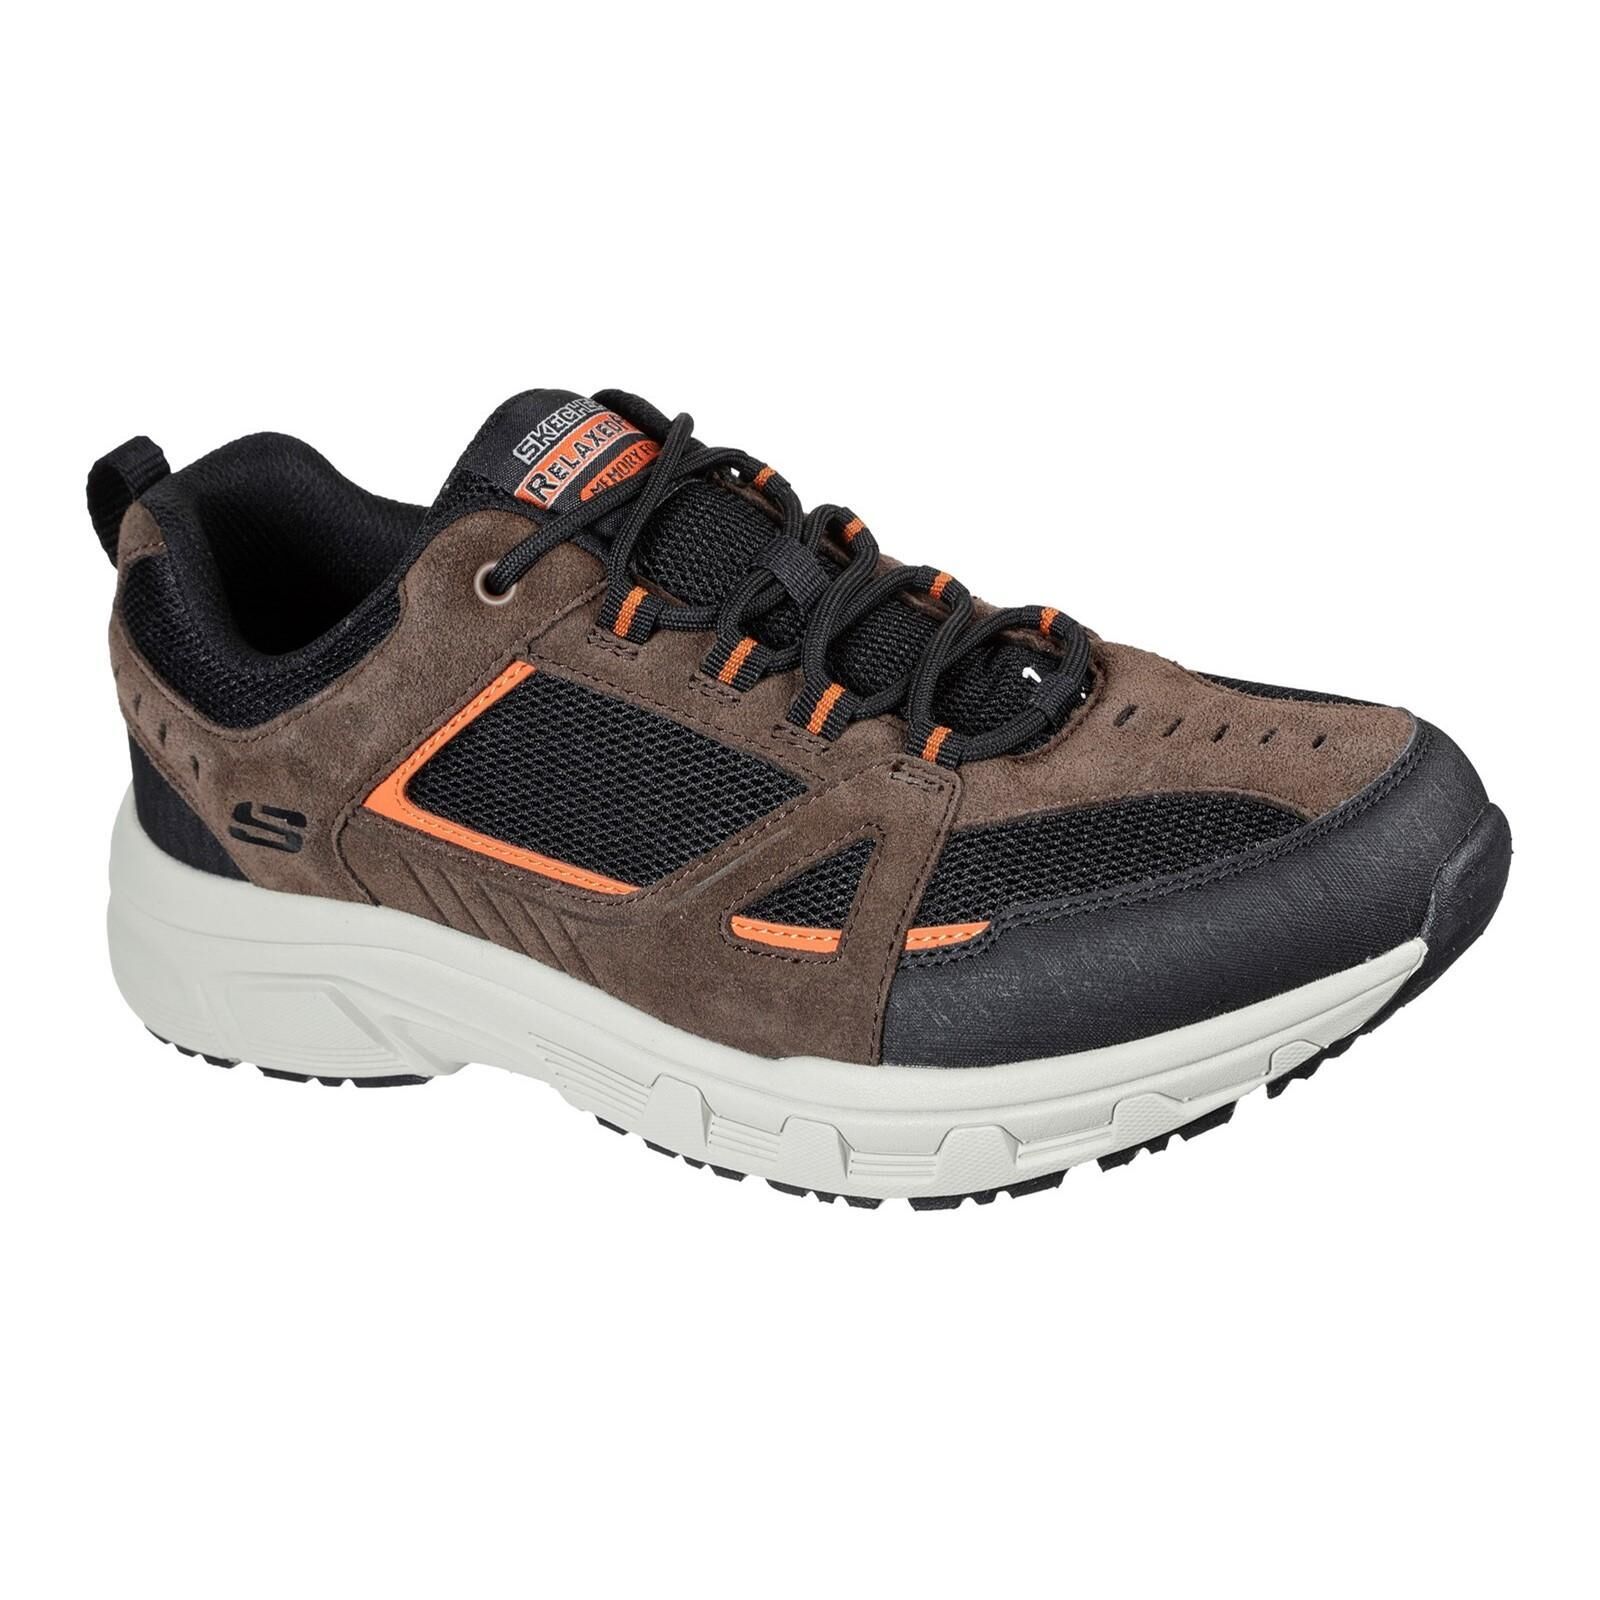 SKECHERS Mens Oak Canyon Duelist Leather Trainers (Chocolate Brown/Black)